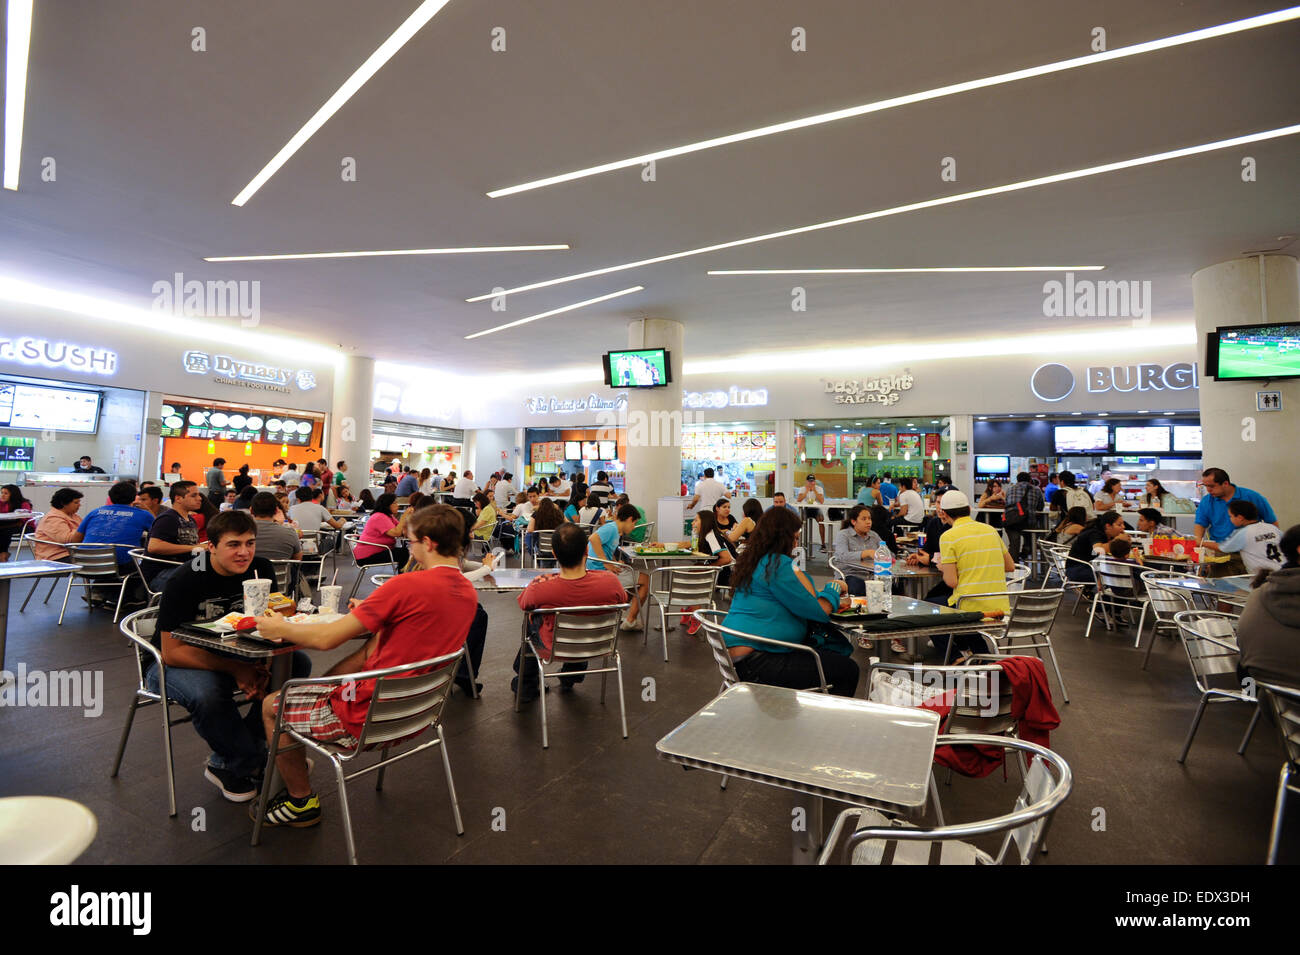 Reforma 222 shopping mall food court in Mexico City, Mexico Stock Photo